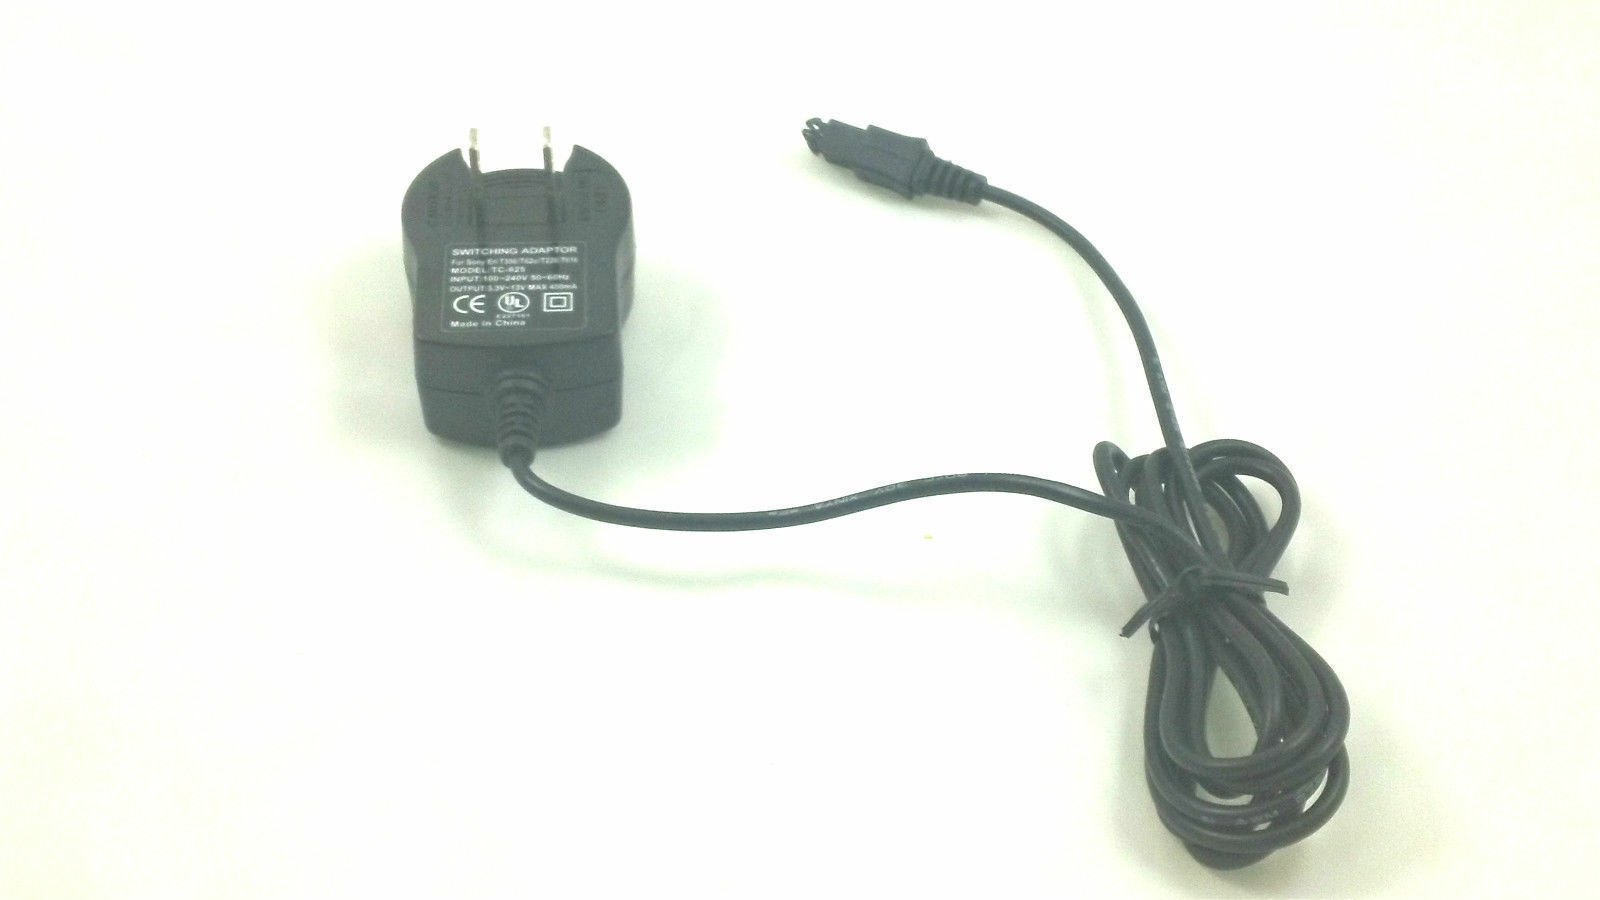 Primary image for battery charger = Sony Ericsson T68i T39M cell phone electric plug power adapter